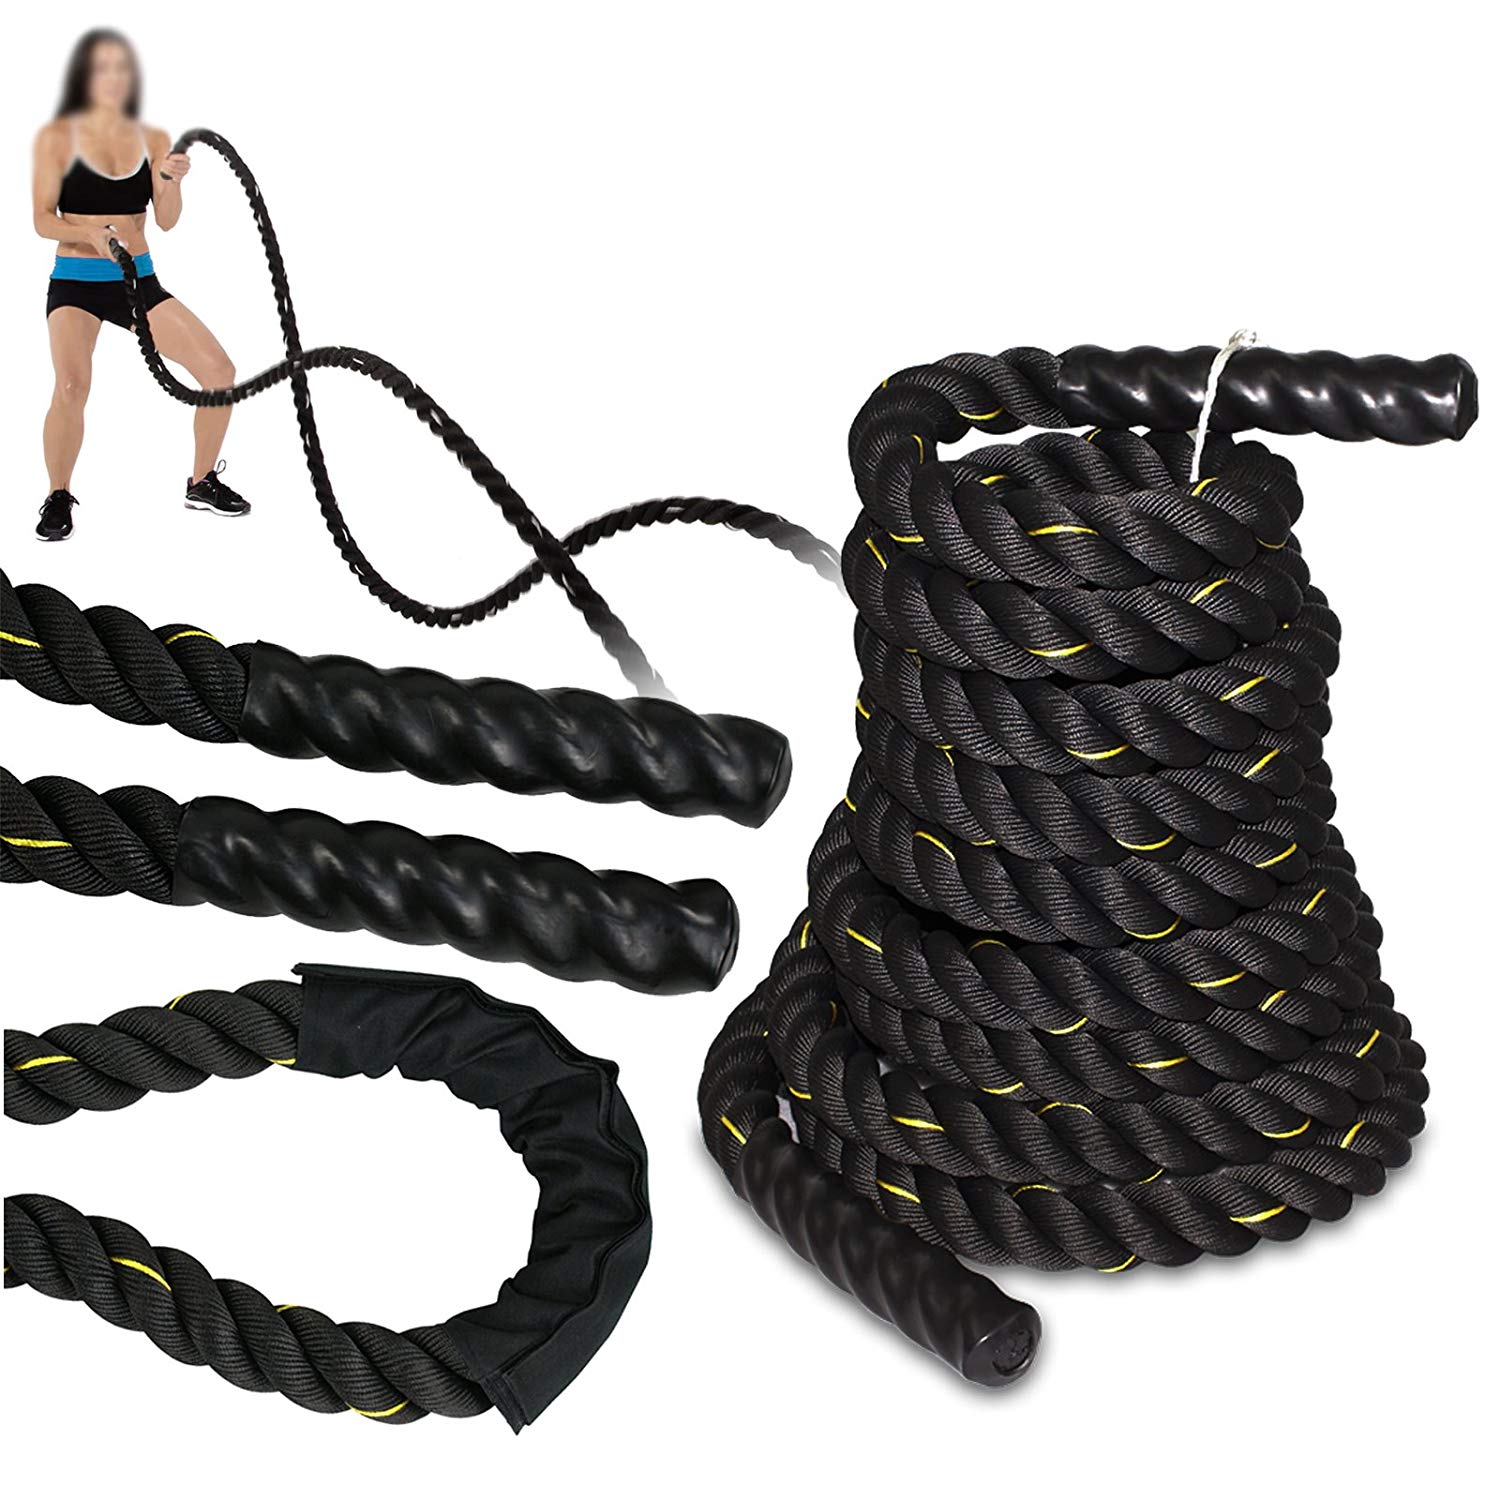 China Manufacturer for Pilates Yoga Ring -
 100% Poly Dacron Heavy Battle Rope for Strength Training – Rise Group